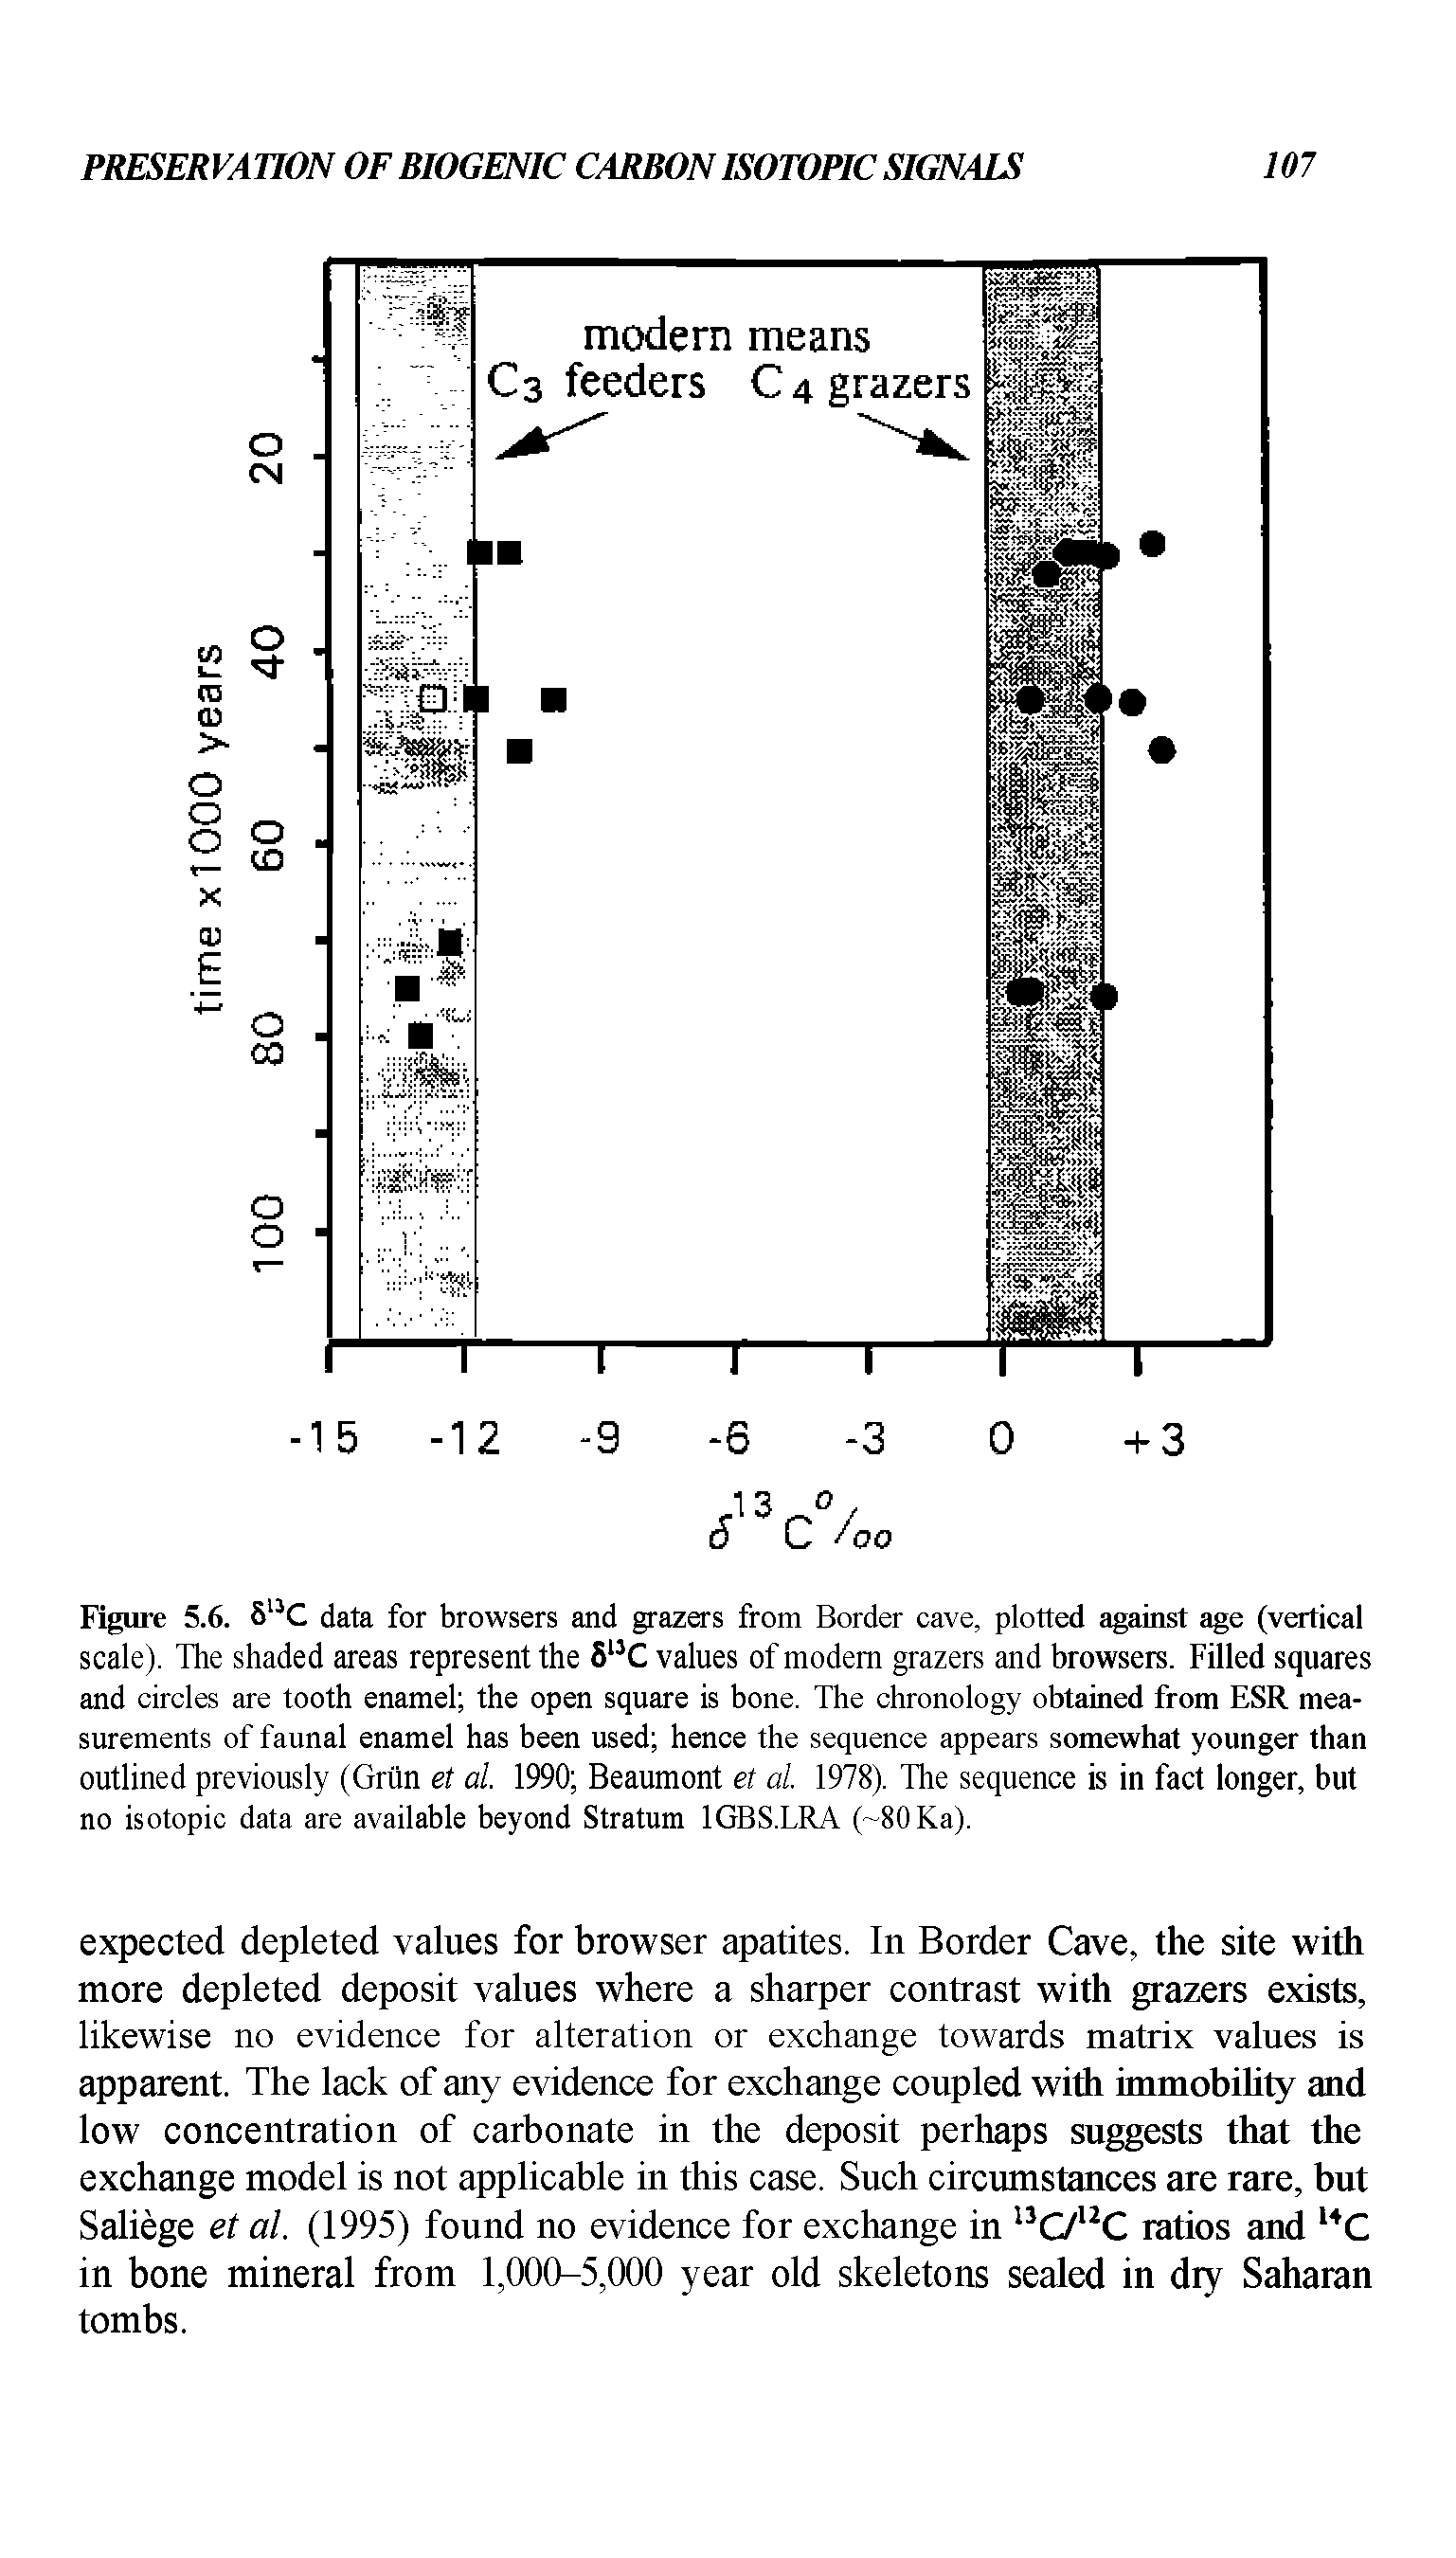 Figure 5.6. 5 C data for browsers and grazers from Border cave, plotted against age (vertical scale). The shaded areas represent the 5 C values of modem grazers and browsers. Filled squares and circles are tooth enamel the open square is bone. The chronology obtained from ESR measurements of faunal enamel has been used hence the sequence appears somewhat younger than outlined previously (Grun et al. 1990 Beaumont et al. 1978). The sequence is in fact longer, but no isotopic data are available beyond Stratum IGBS.LRA ( 80Ka).